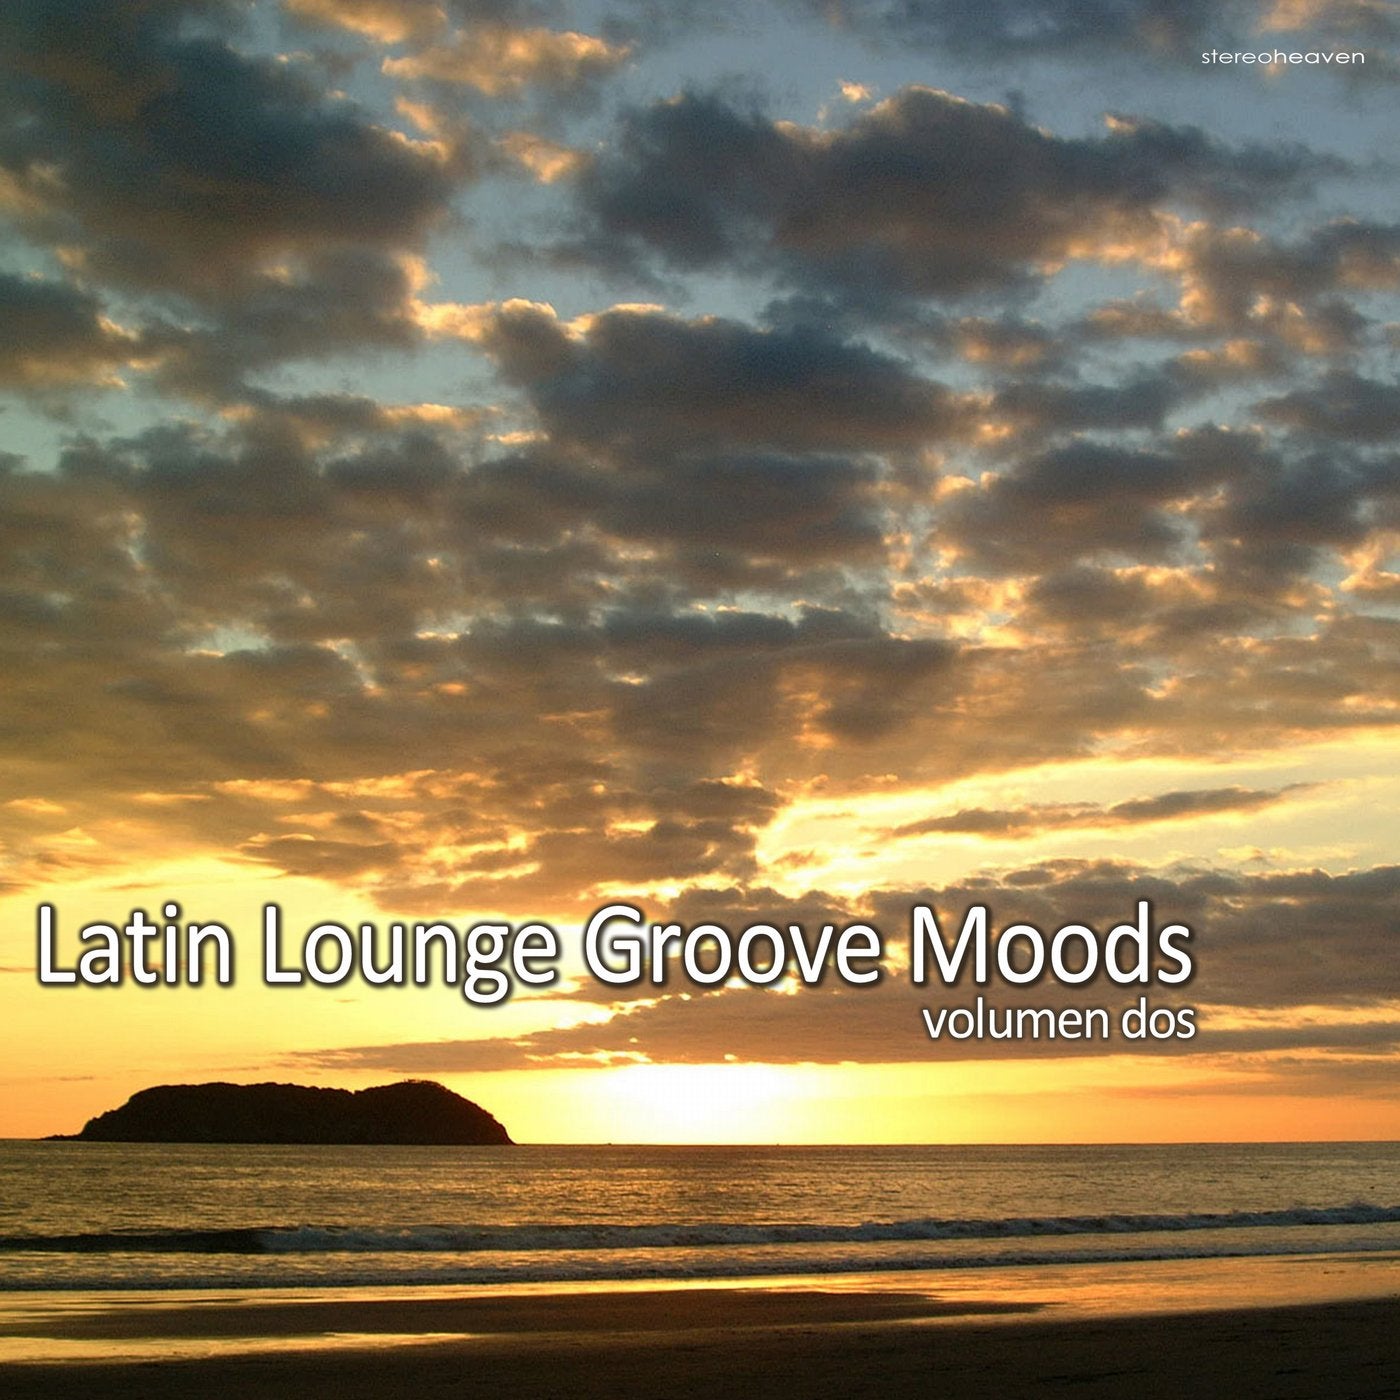 Latin Lounge Groove Moods, Vol. Dos